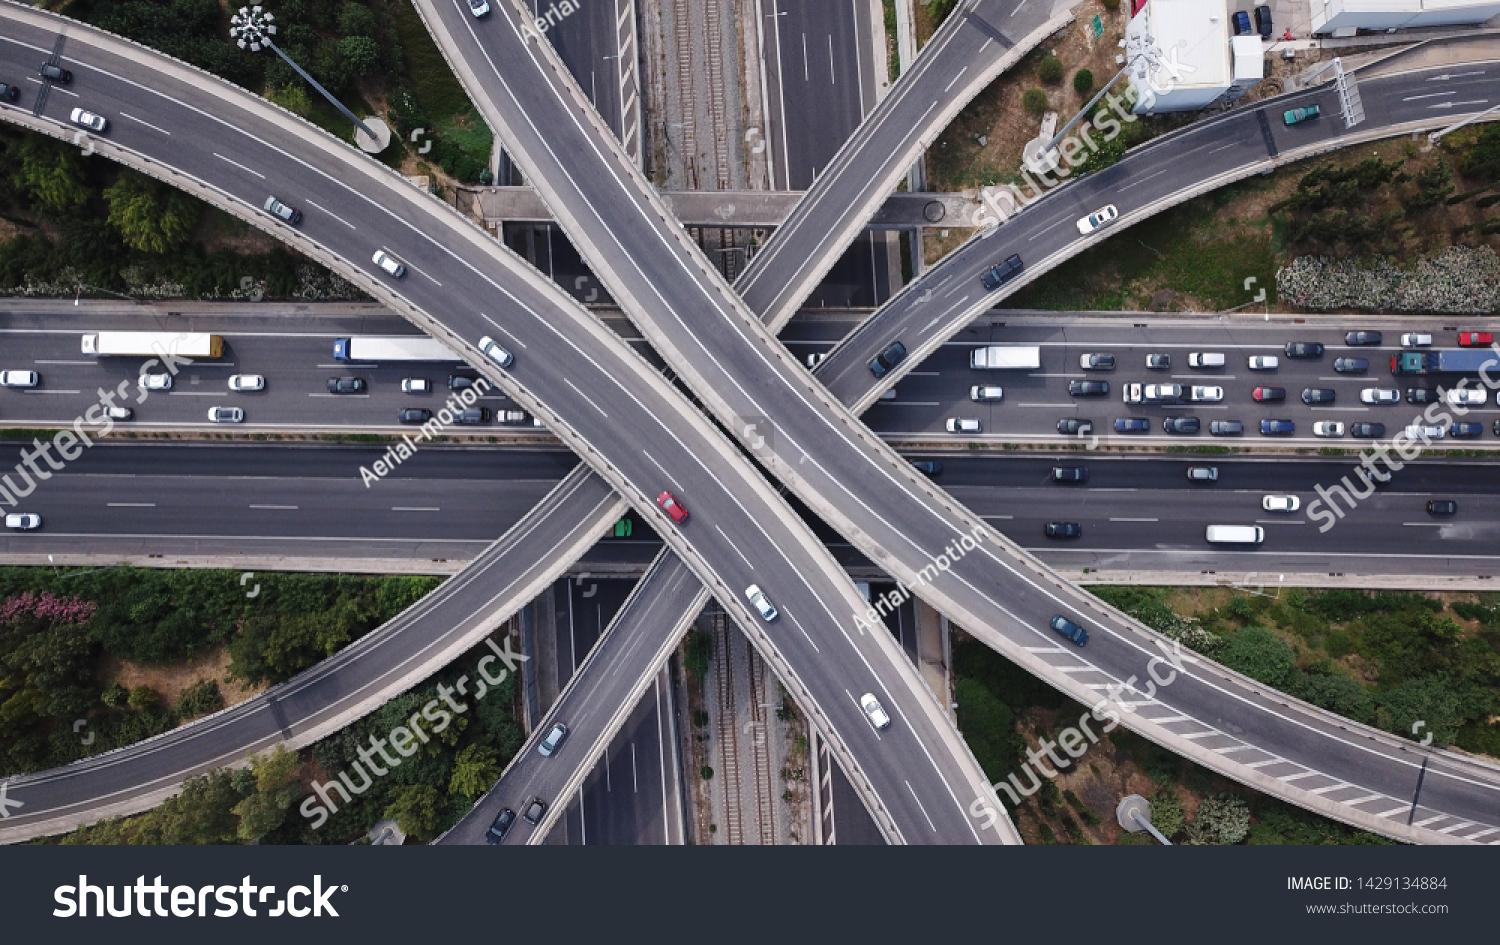 Aerial drone top view photo of highway multilevel junction interchange road in urban populated area #1429134884